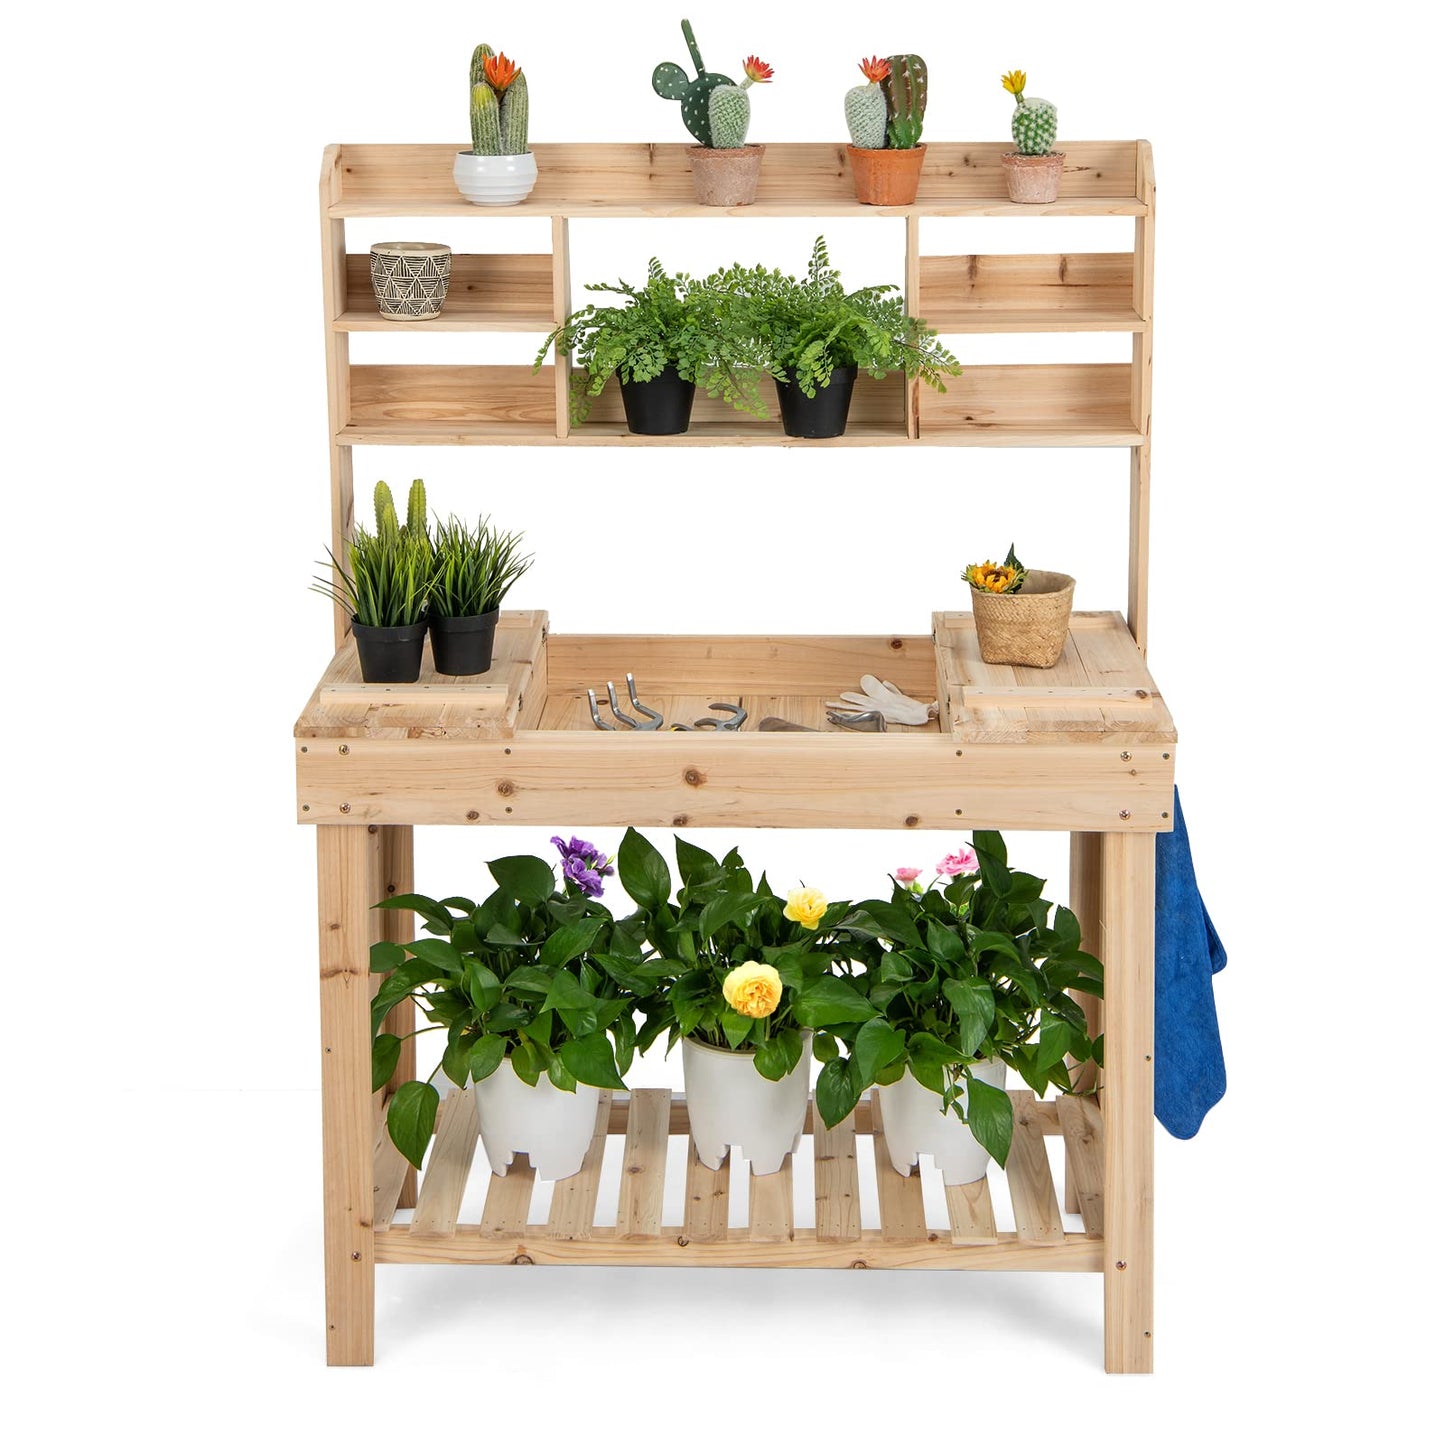 HAPPYGRILL Potting Bench Table, 60.5” Wood Workstation Workbench Table with Flip-Up Tabletop, Shelves & Hanging Hooks, Outdoor Flowerpot Bench,